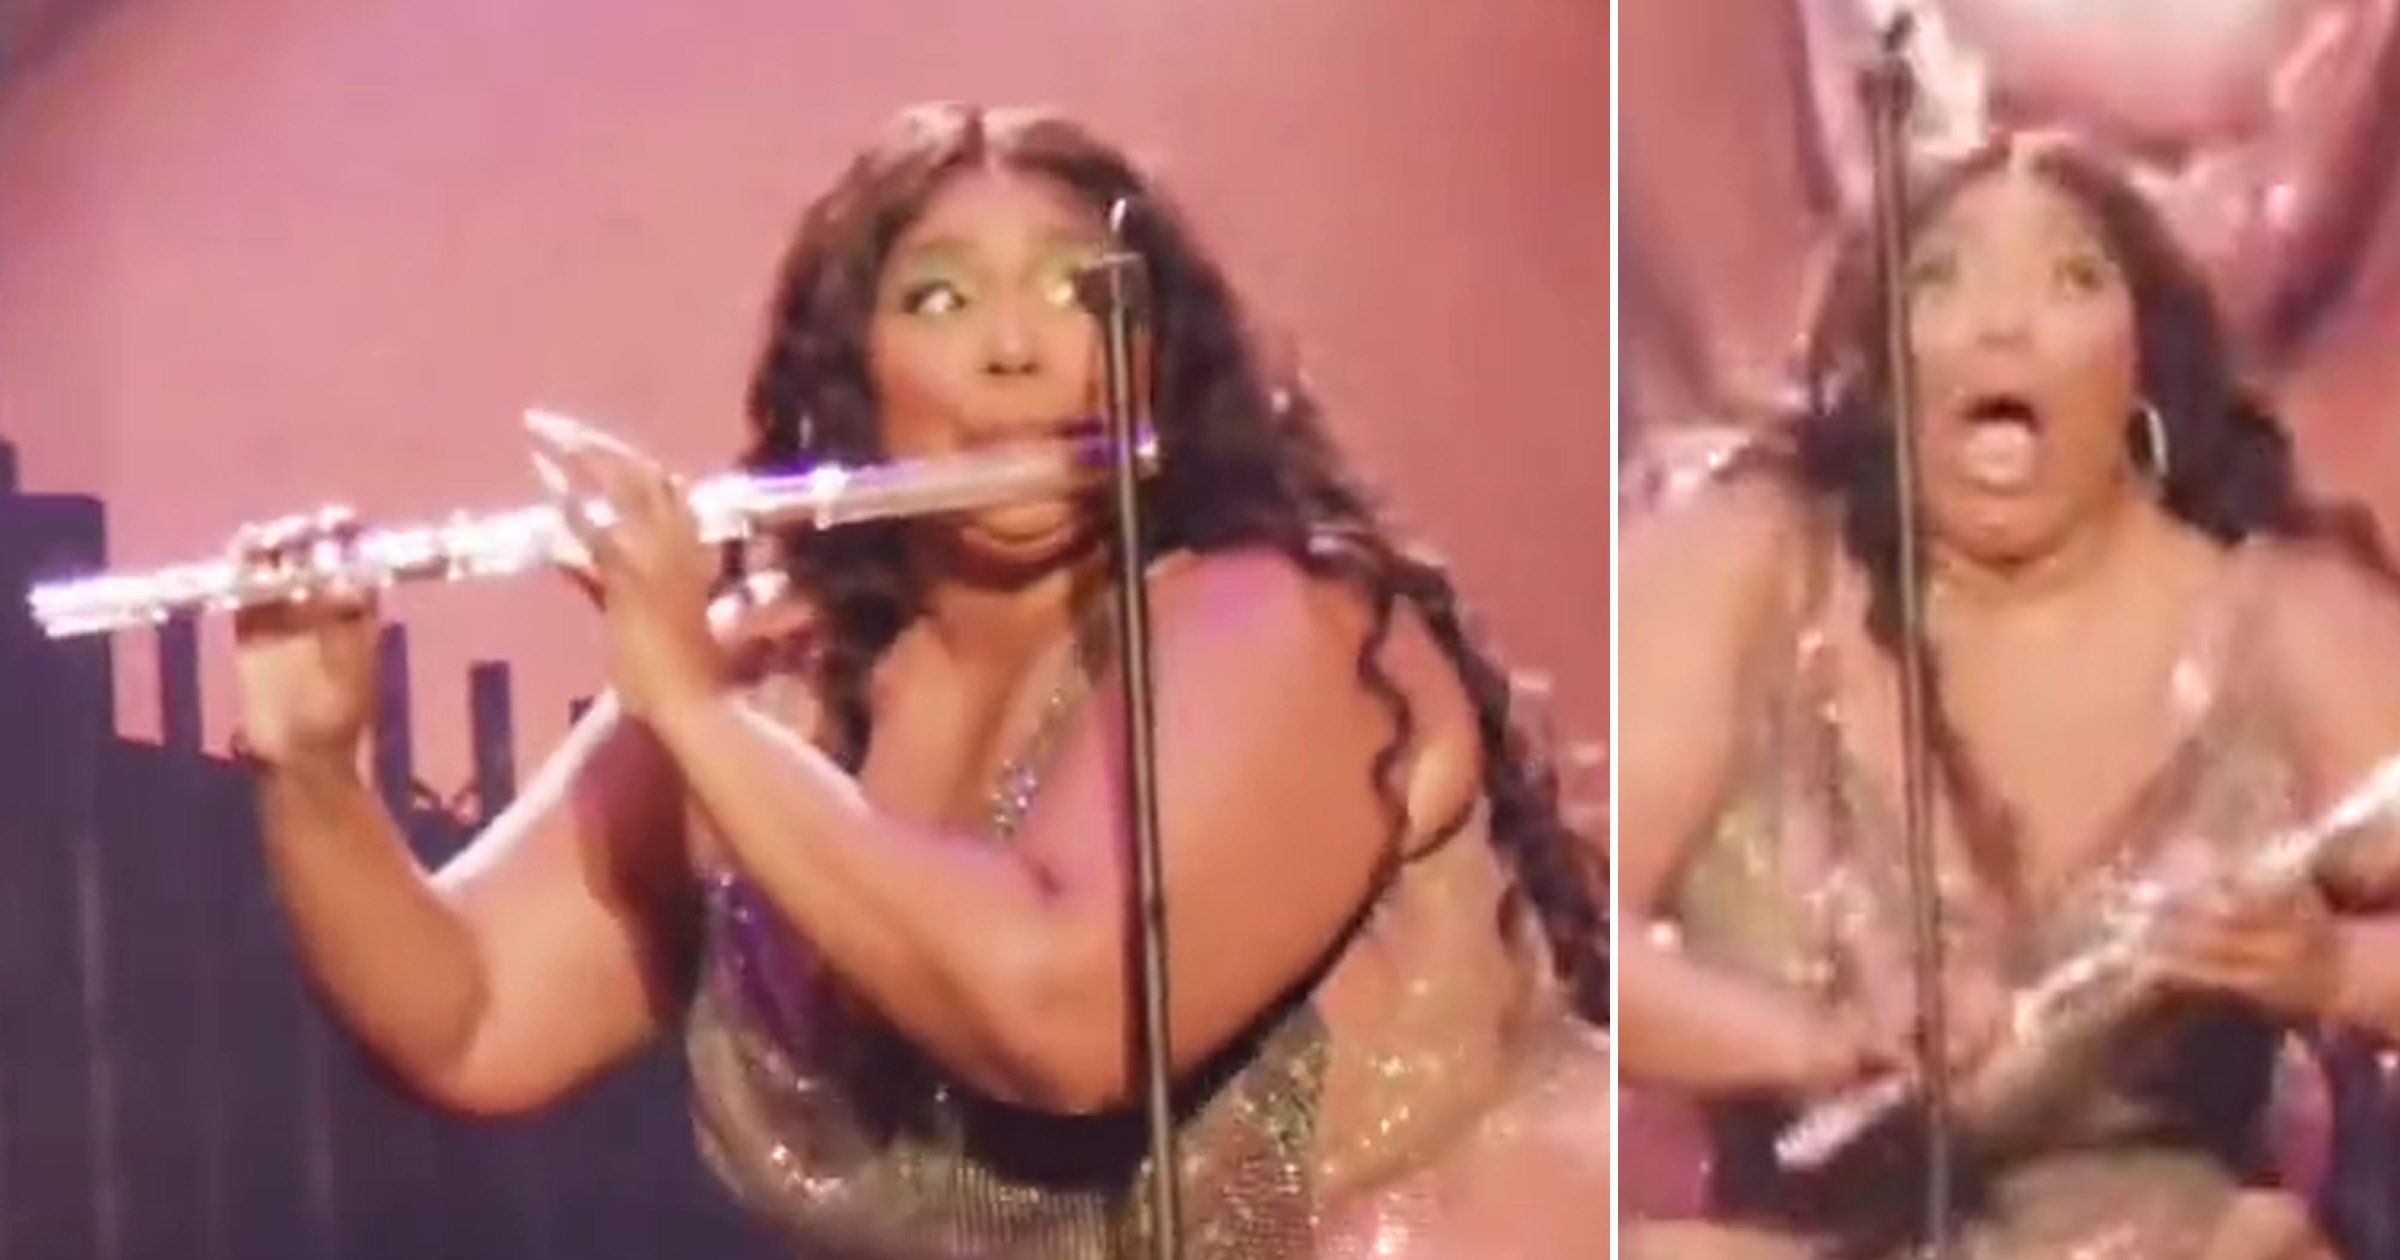 Lizzo makes history at The Library of Congress after playing 200-year-old crystal flute